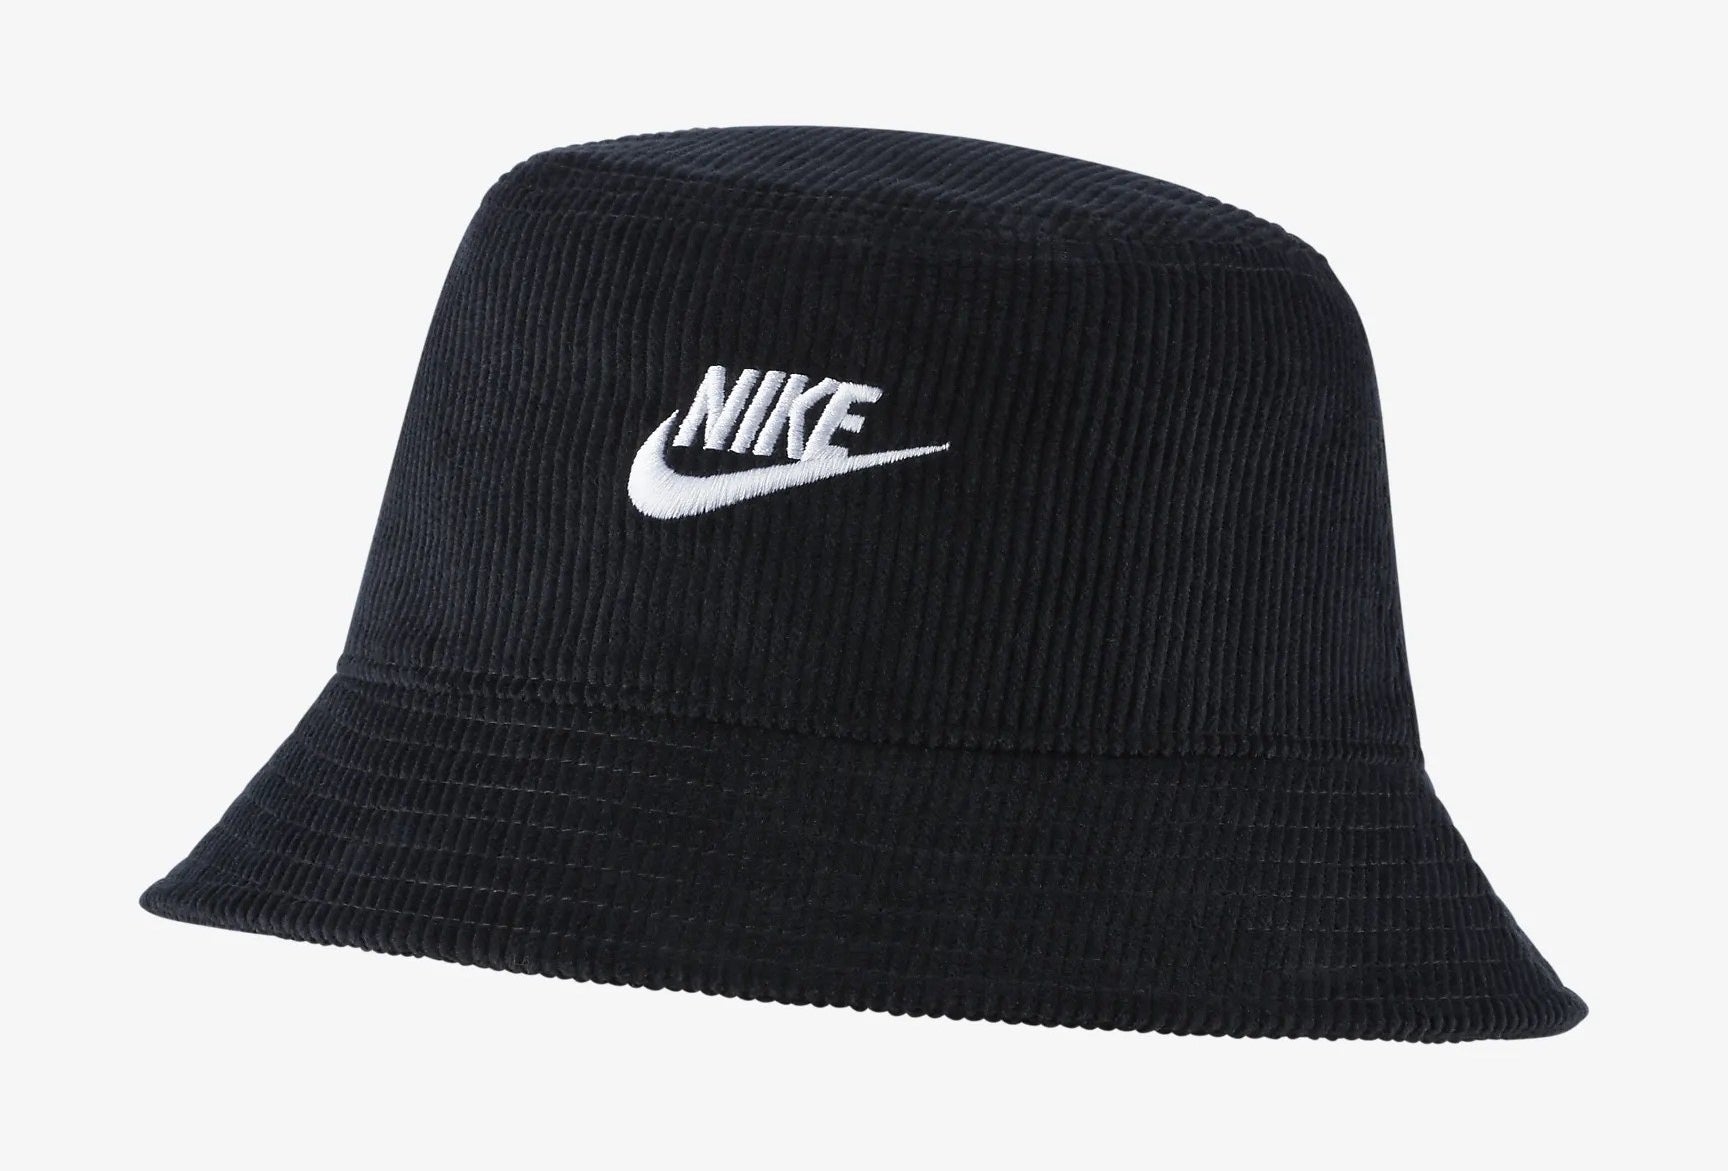 A black textured bucket hat with logo